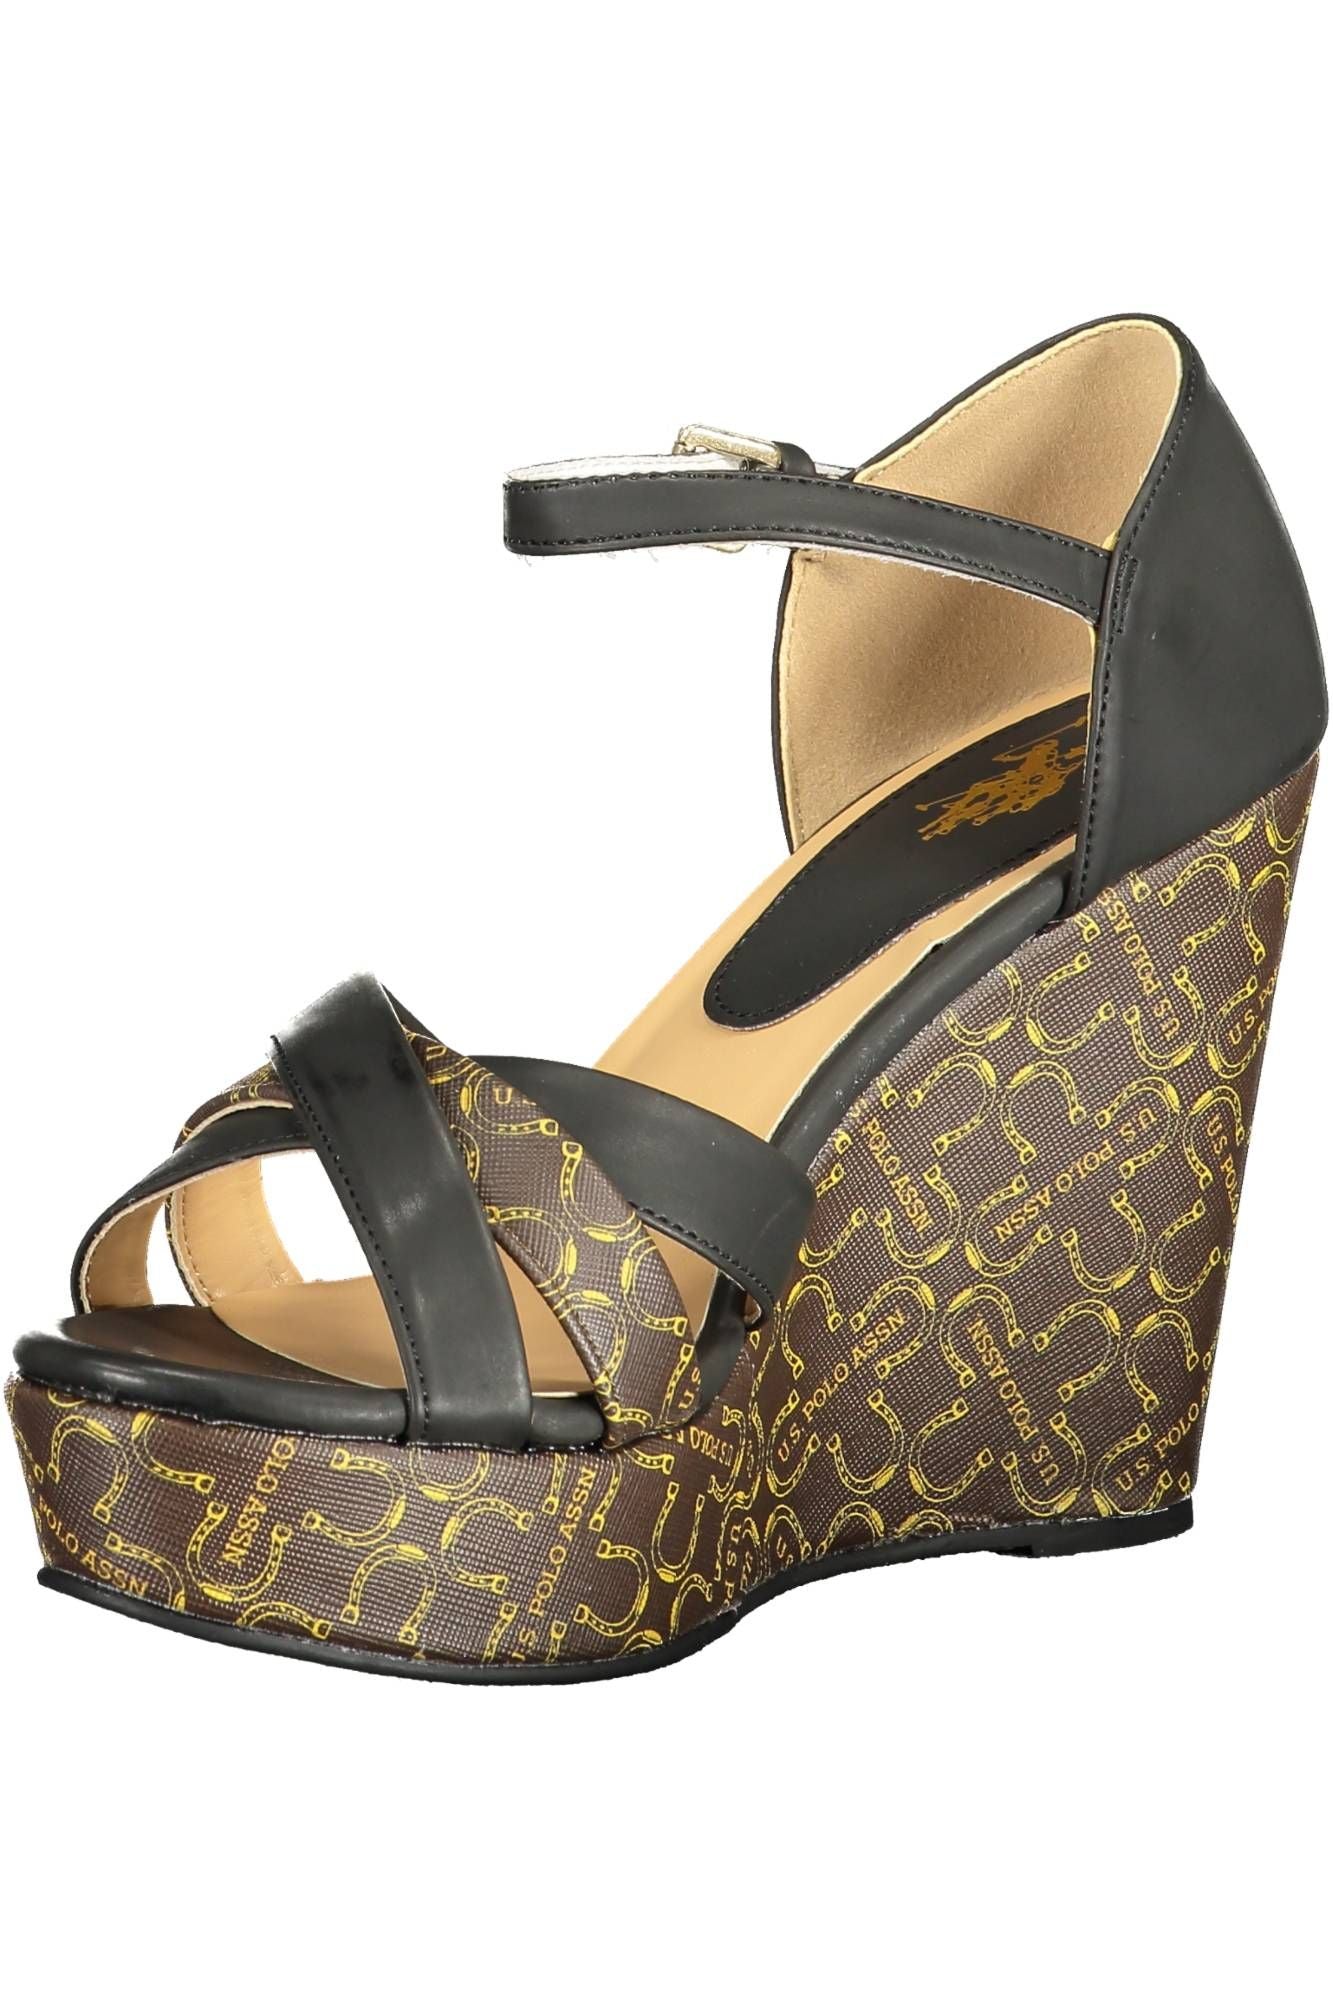 U.S. POLO ASSN. Chic Ankle-Strap Wedge Sandals